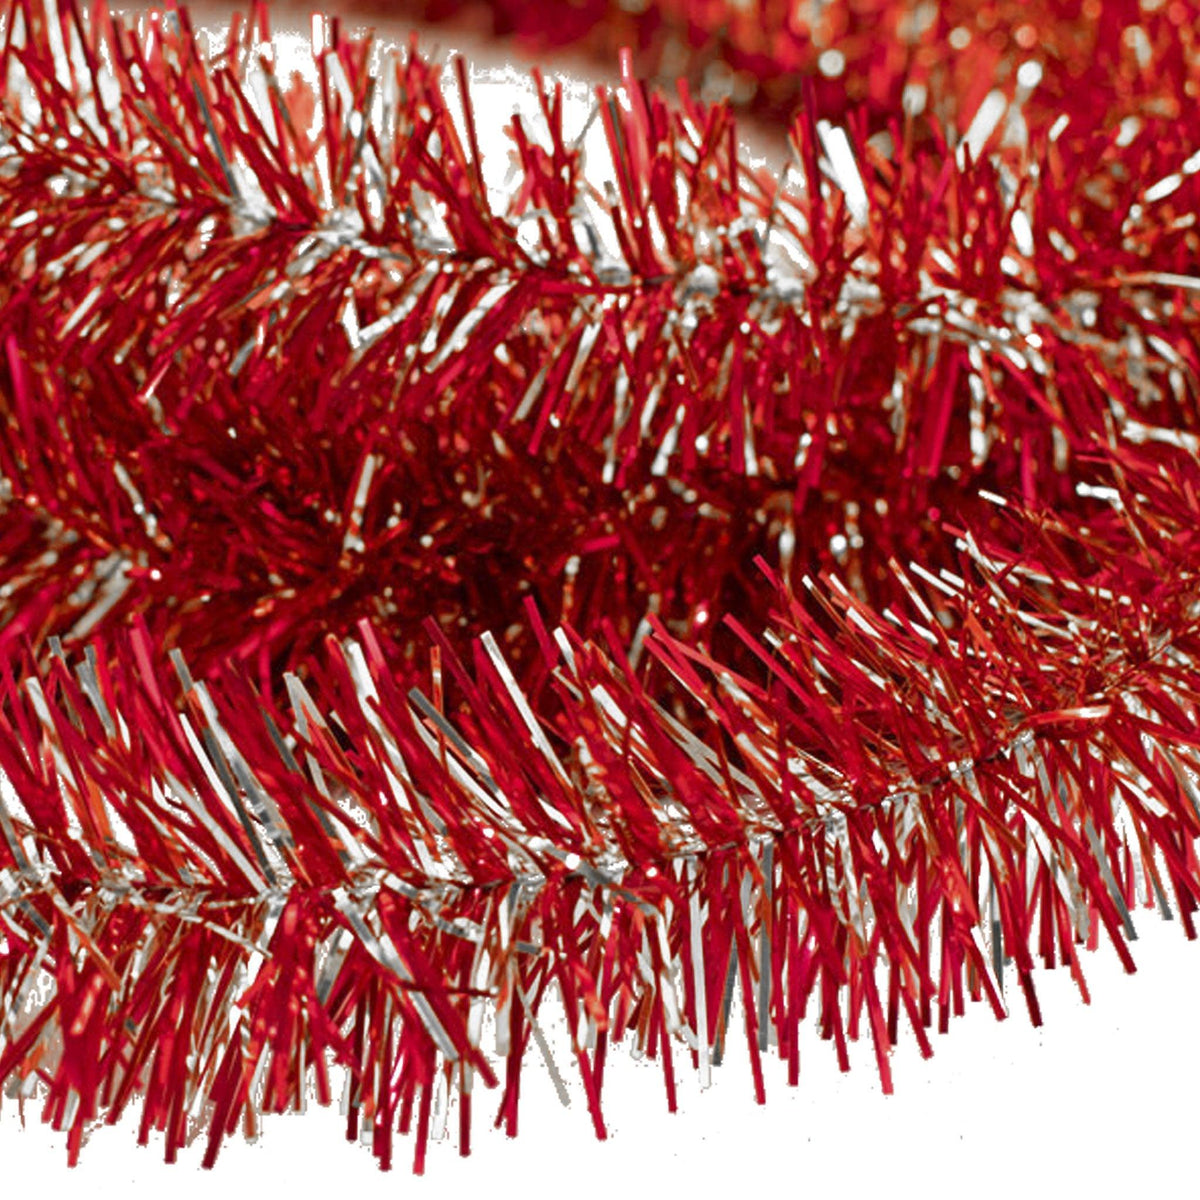 Lee Display's brand new 25ft Shiny Red and Metallic Silver Tinsel Garlands and Fringe Embellishments on sale at leedisplay.com